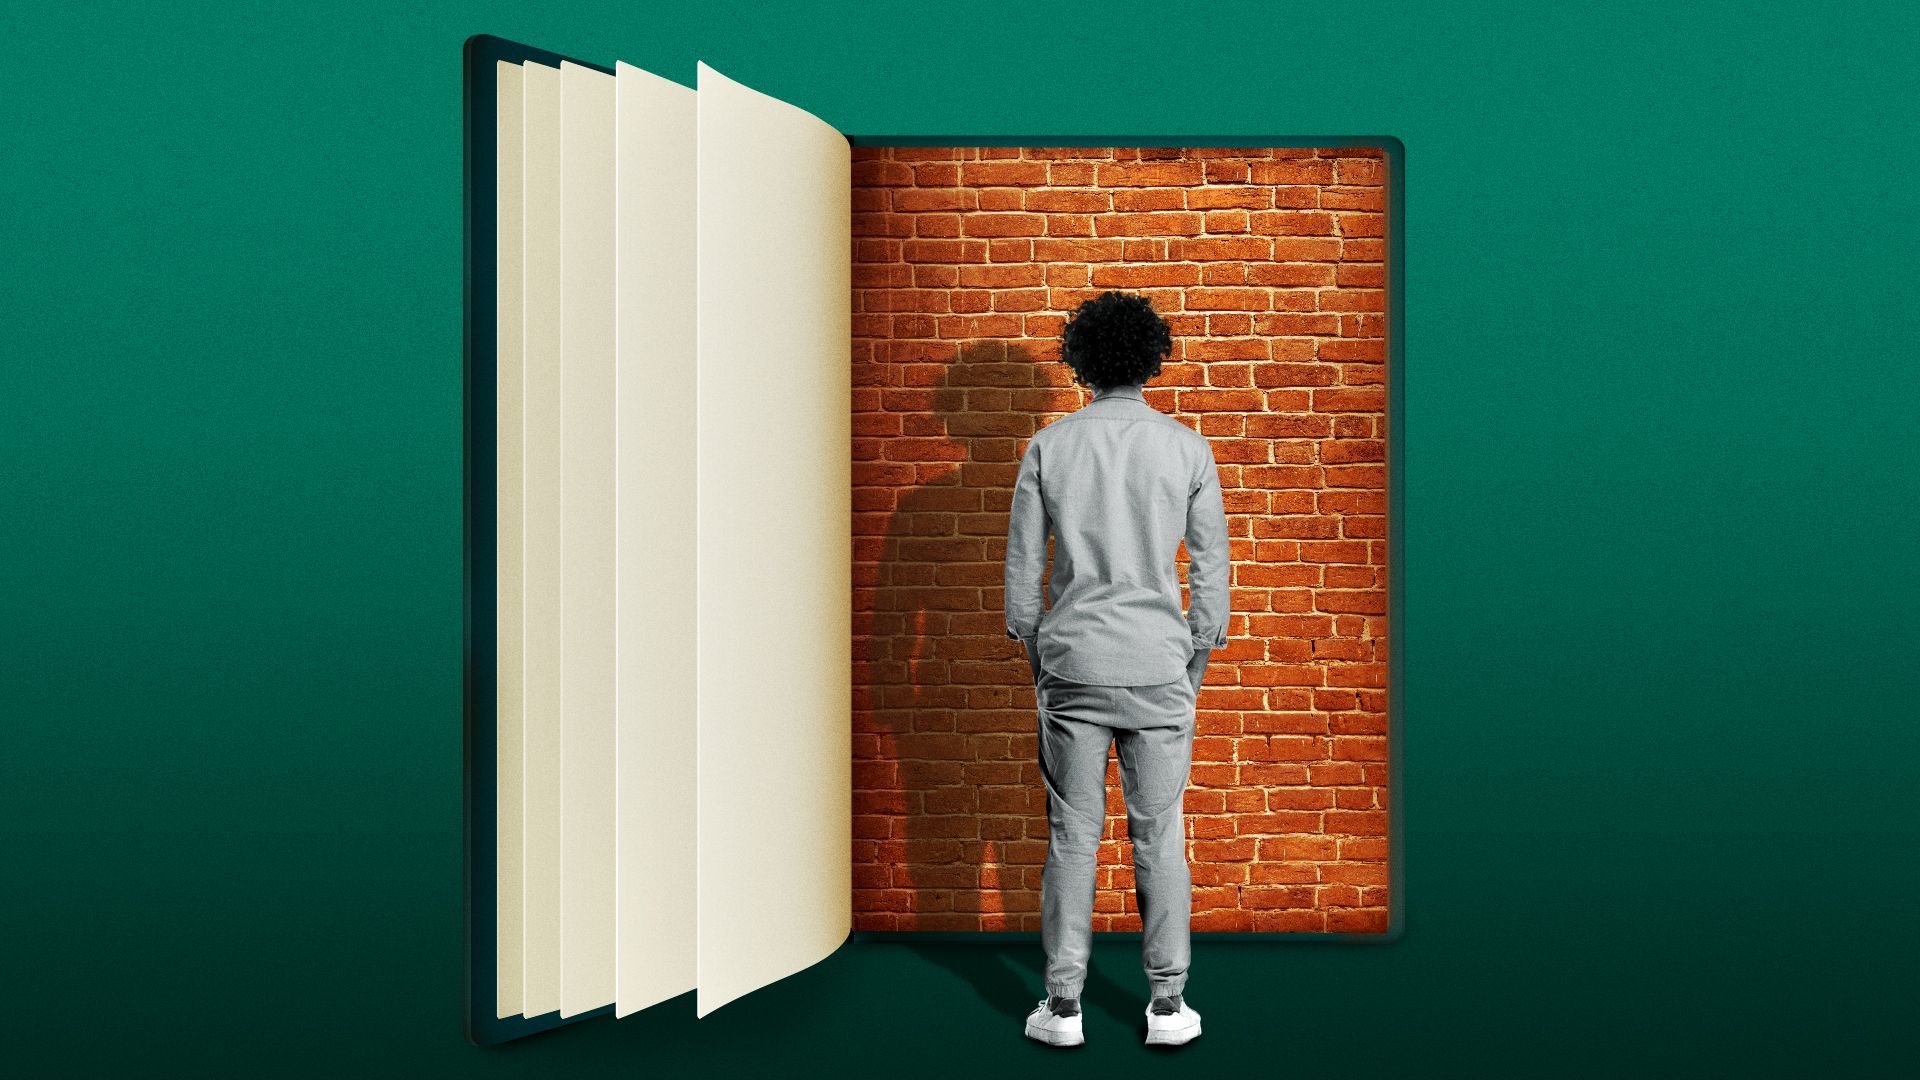 Illustration of a tiny person facing a brick wall, which is also the interior of a giant book.